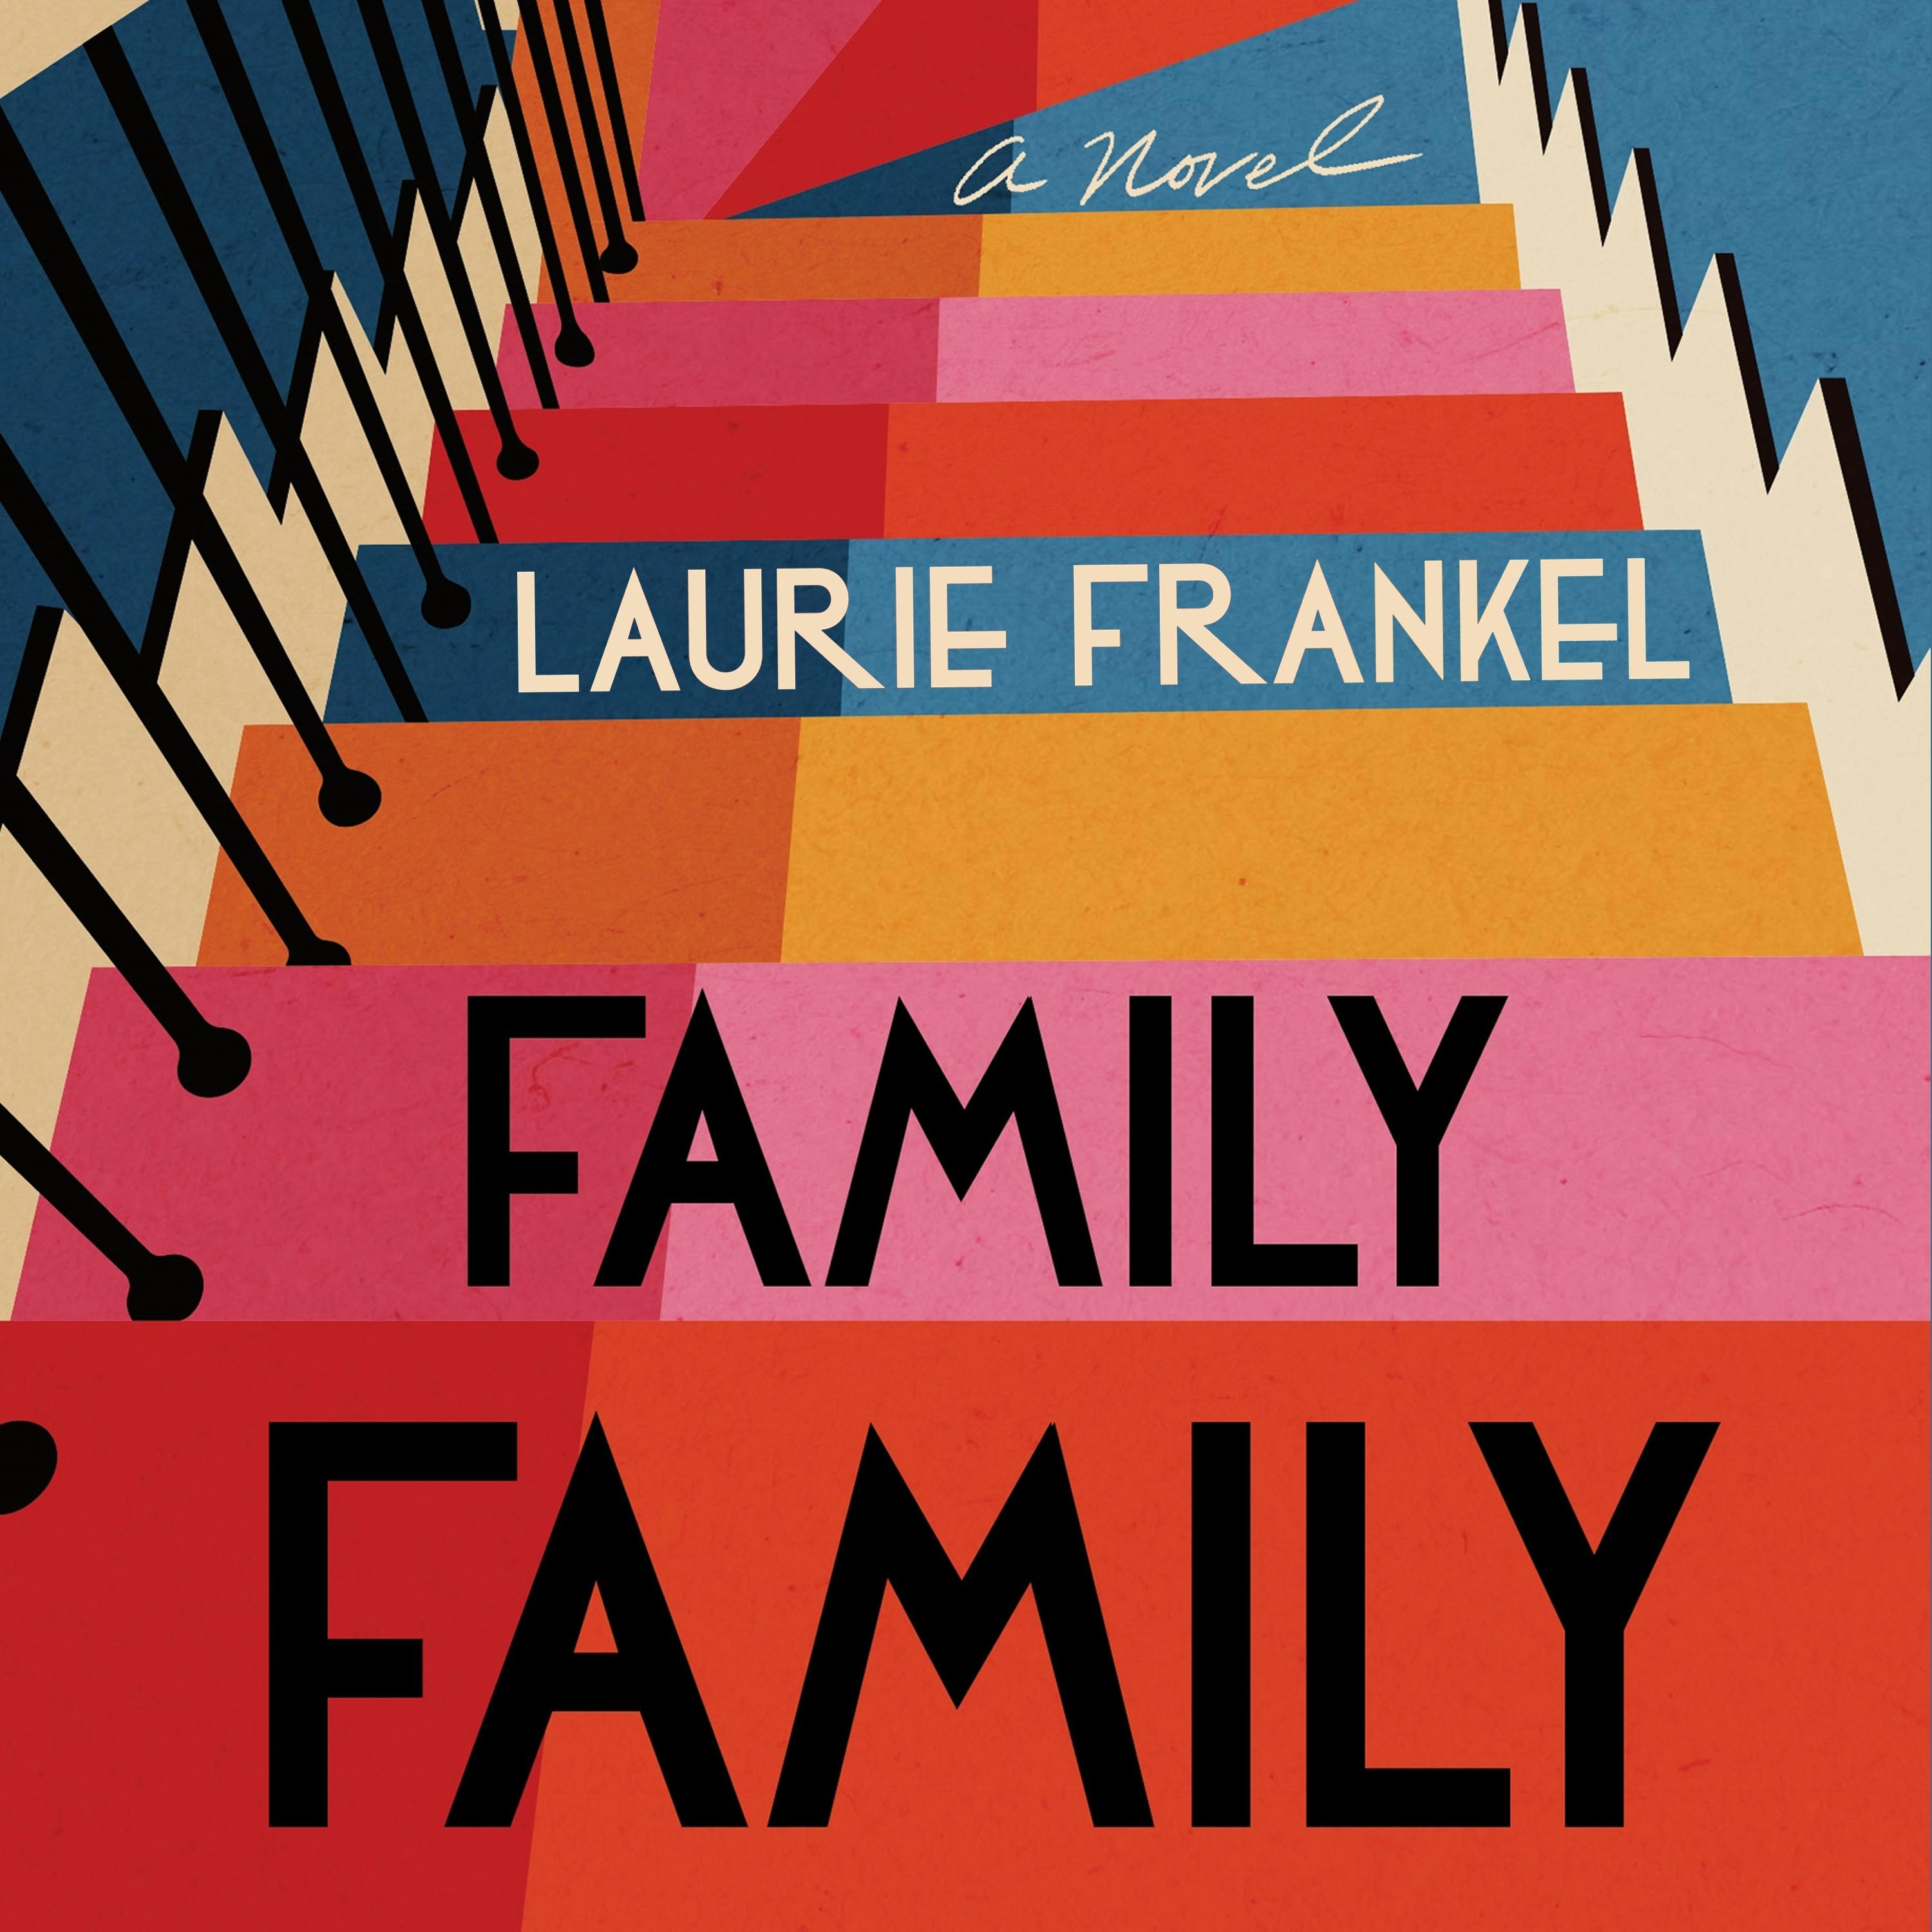 One Two Three: A Novel by Frankel, Laurie